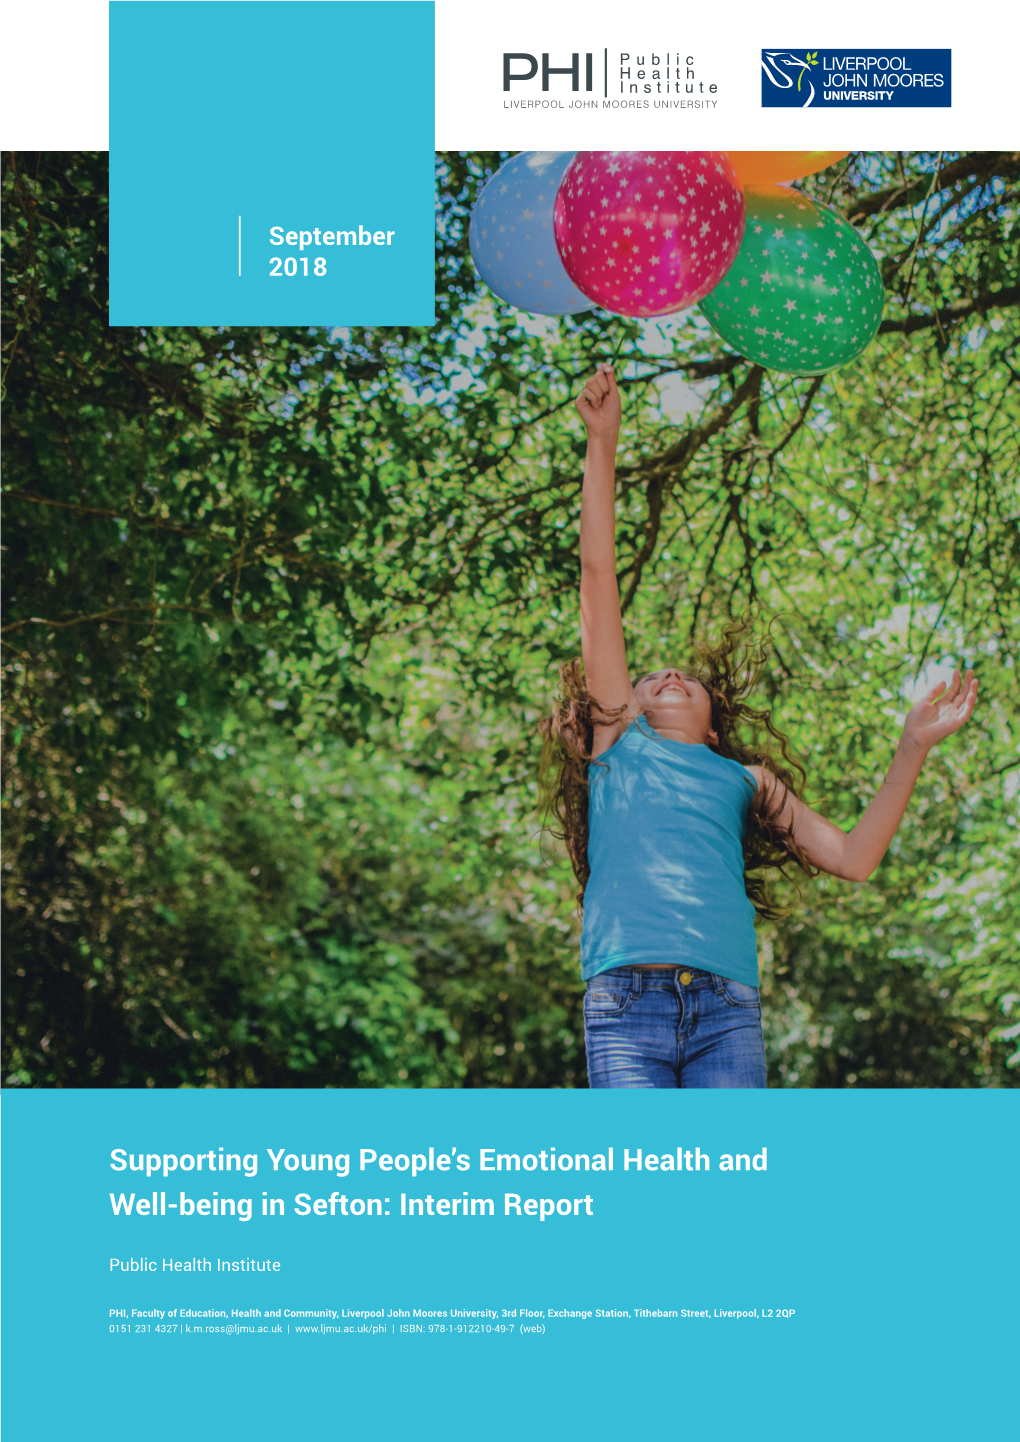 Supporting Young People's Emotional Health and Well-Being in Sefton